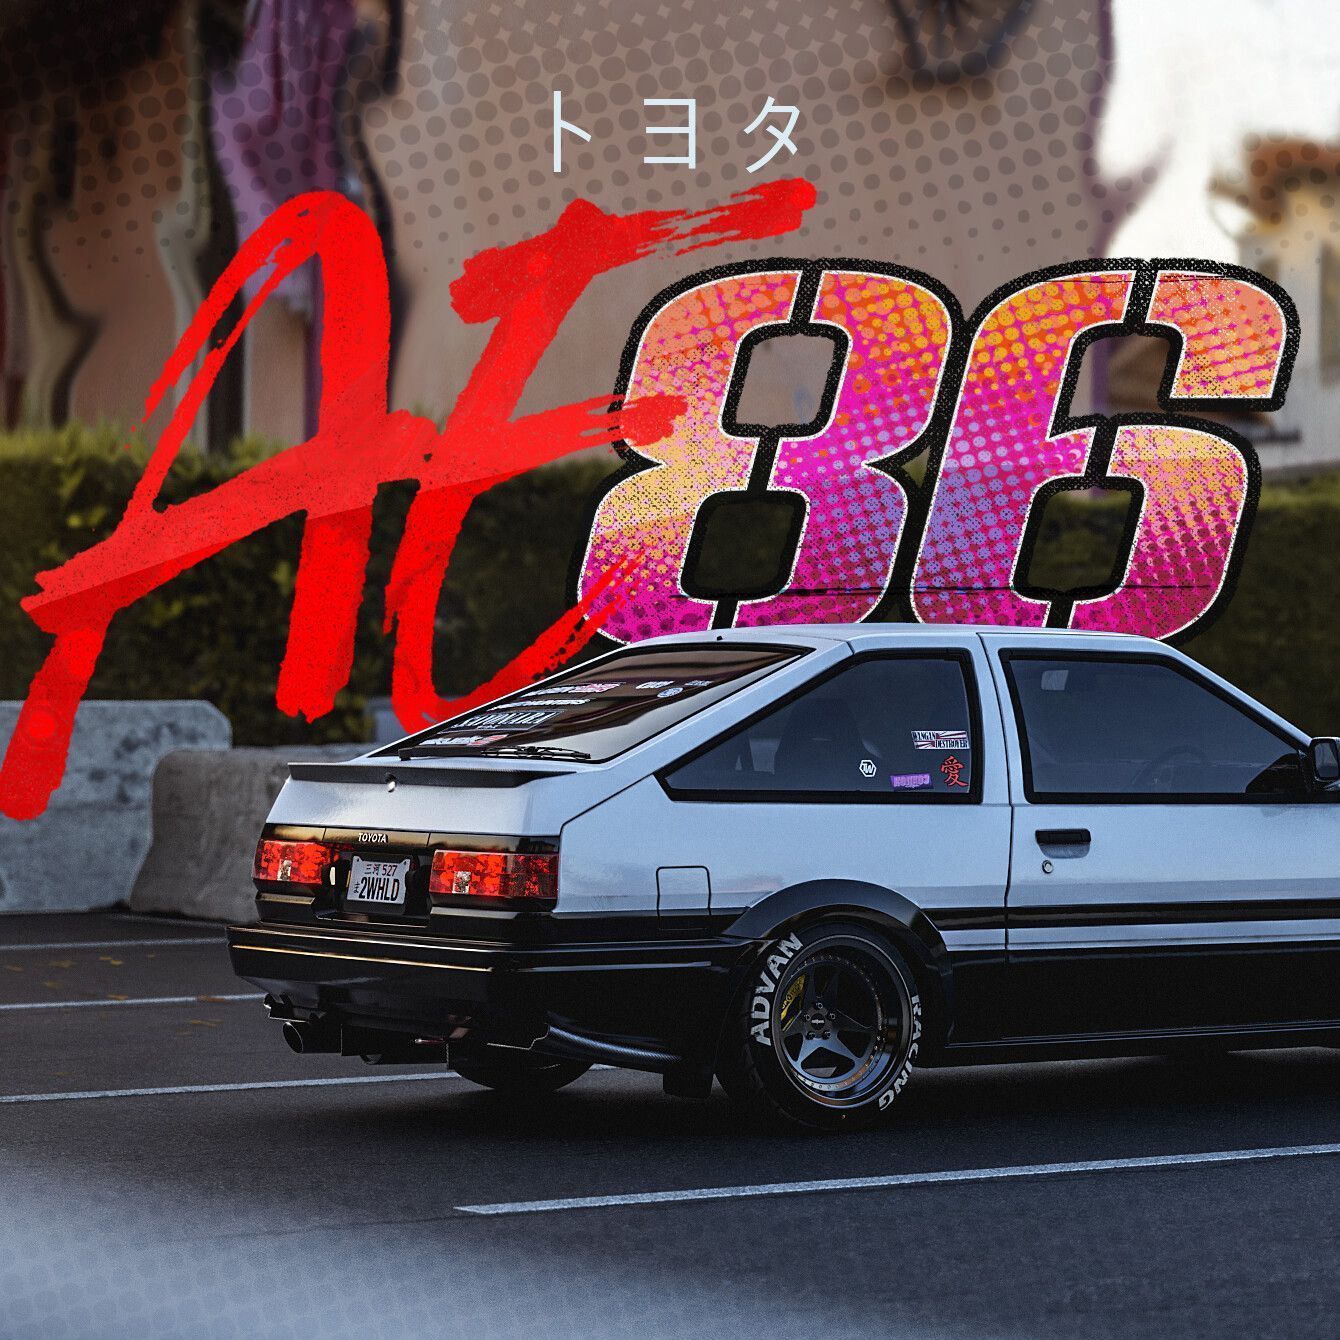 A black and white AE86 car with a graffiti background - Toyota AE86